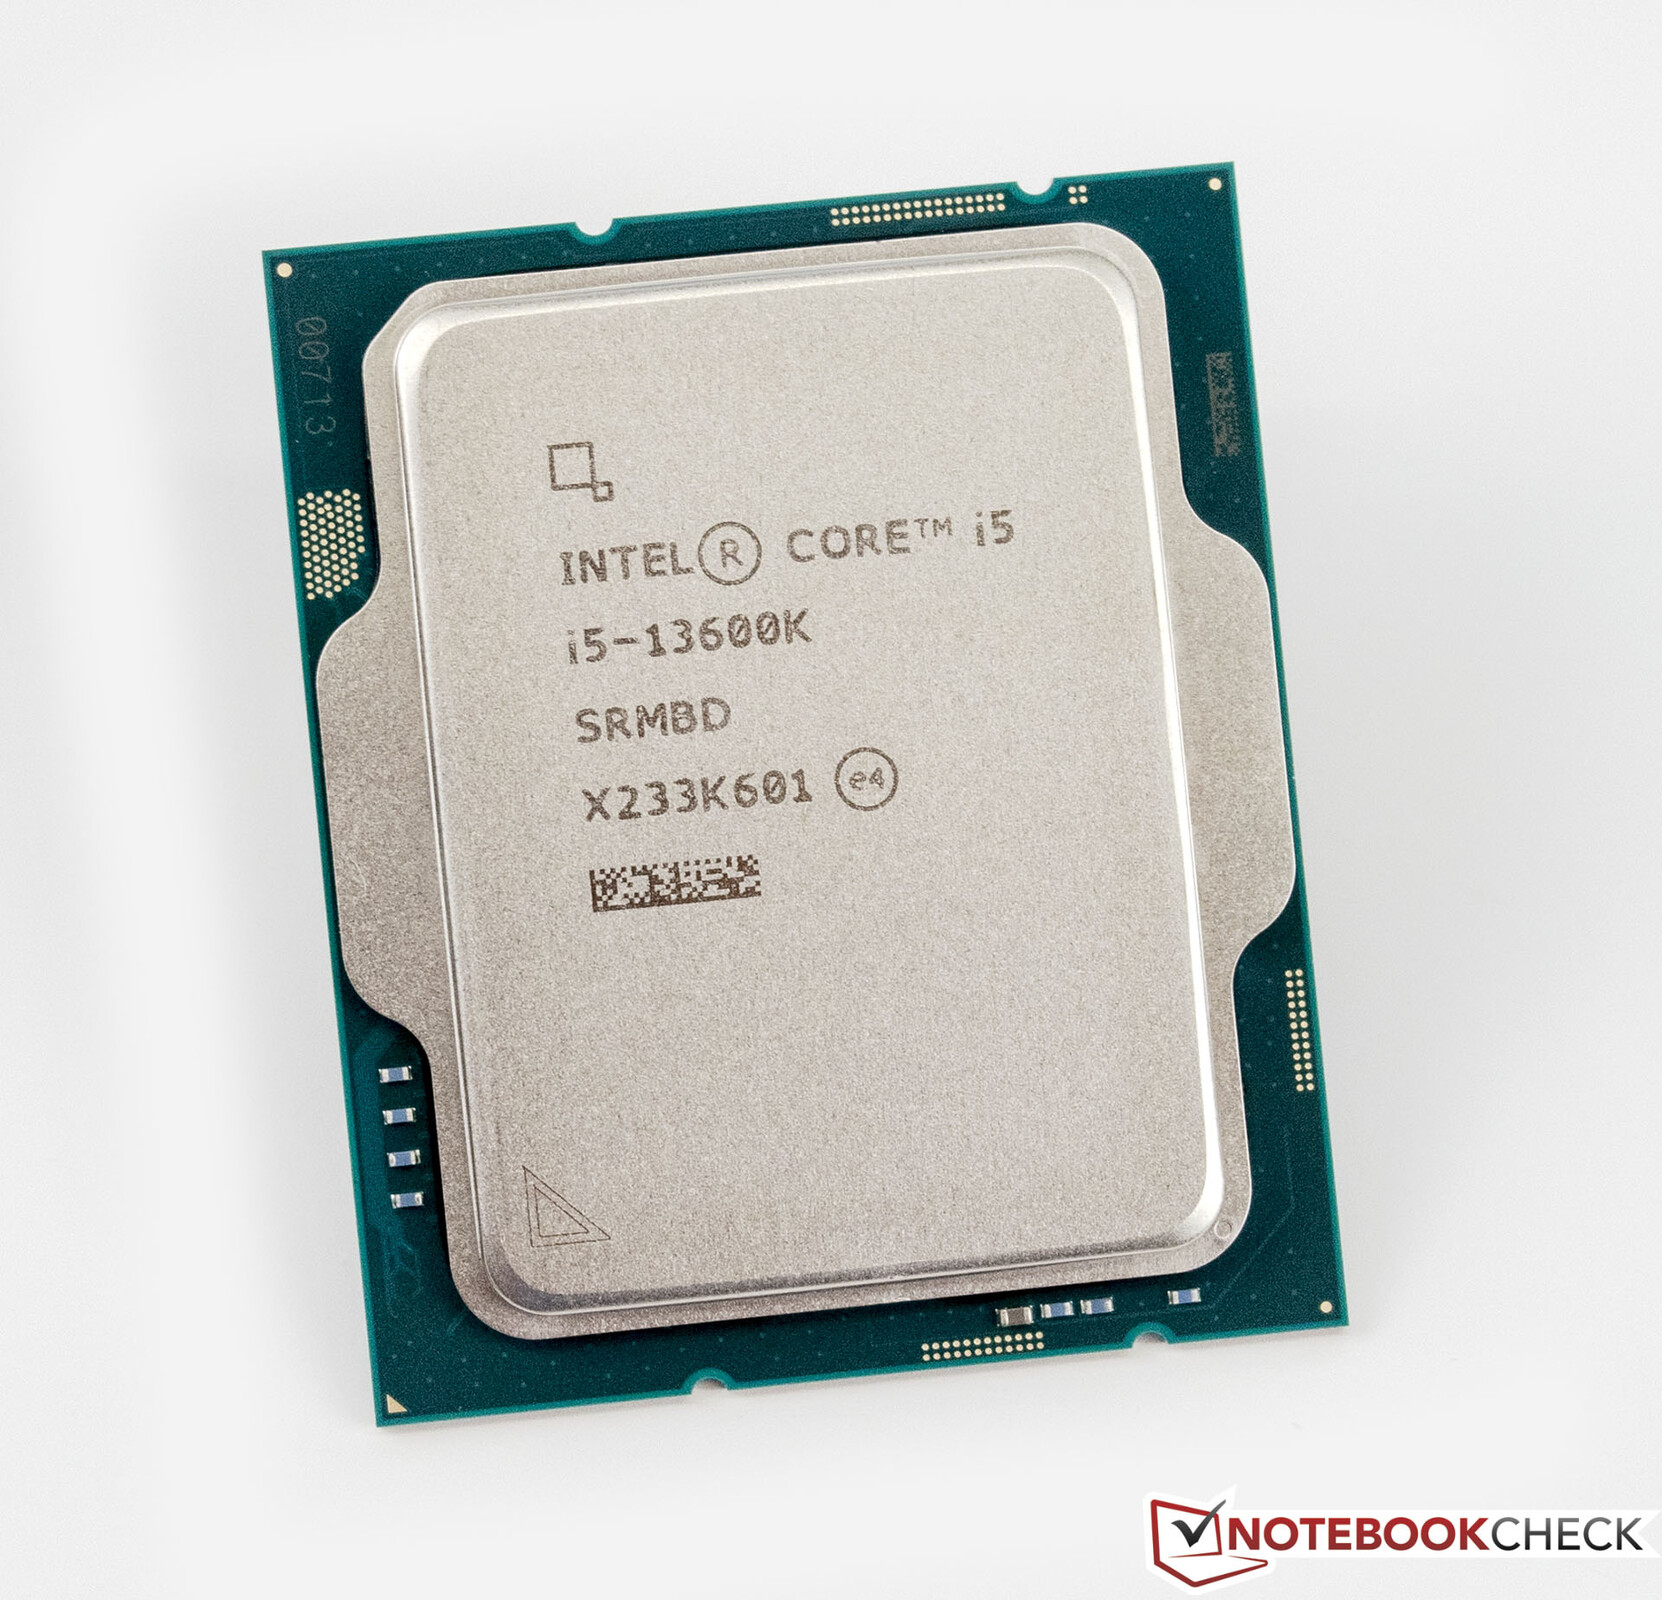 Intel Core i5-14600K specifications leak suggesting considerably